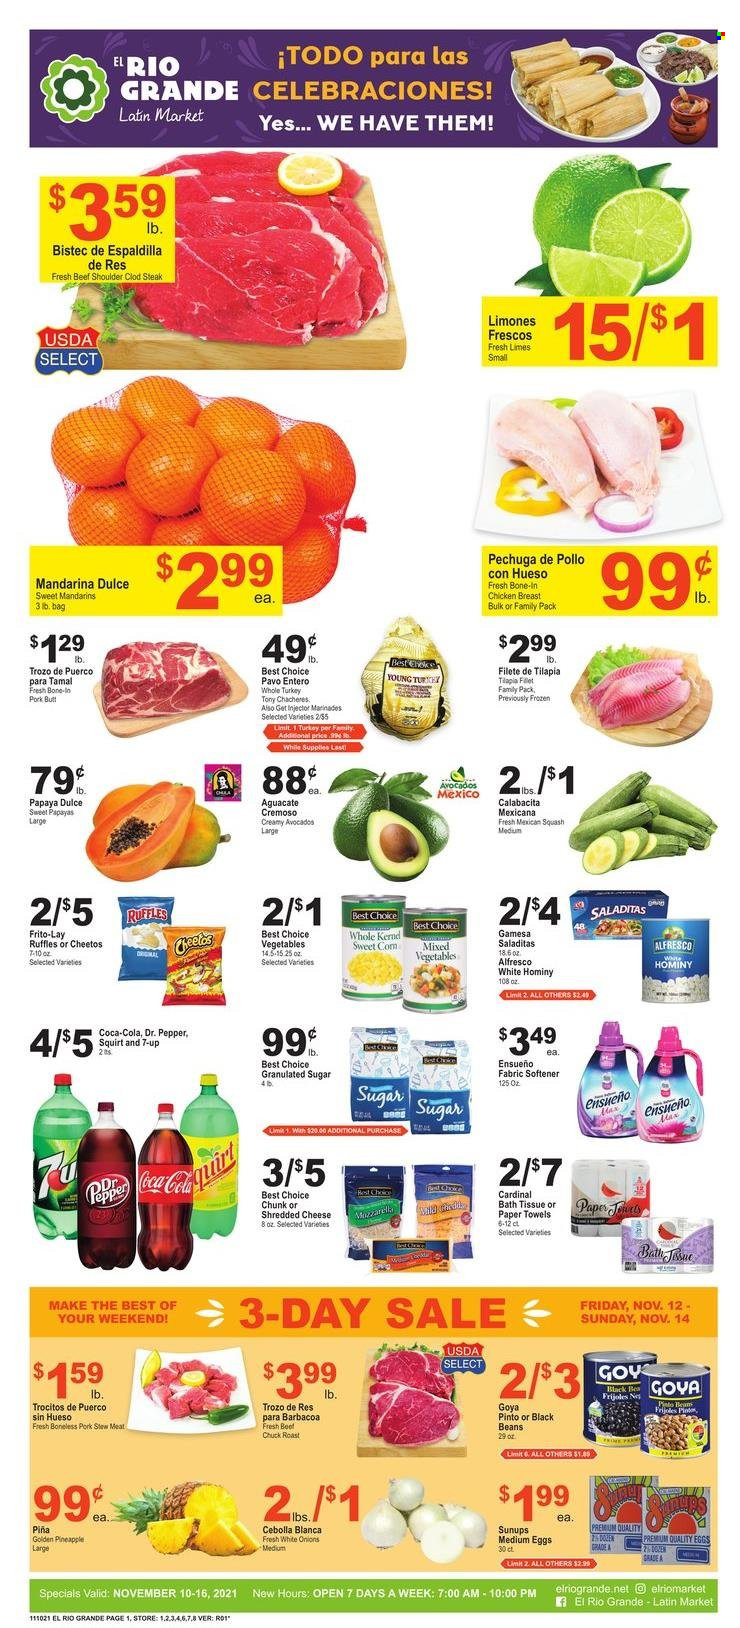 thumbnail - El Rio Grande Flyer - 11/10/2021 - 11/16/2021 - Sales products - stew meat, mexican squash, avocado, limes, mandarines, pineapple, papaya, tilapia, shredded cheese, eggs, mixed vegetables, Cheetos, Frito-Lay, Ruffles, granulated sugar, sugar, Goya, Coca-Cola, Dr. Pepper, 7UP, whole turkey, chicken breasts, beef meat, steak, chuck roast. Page 1.